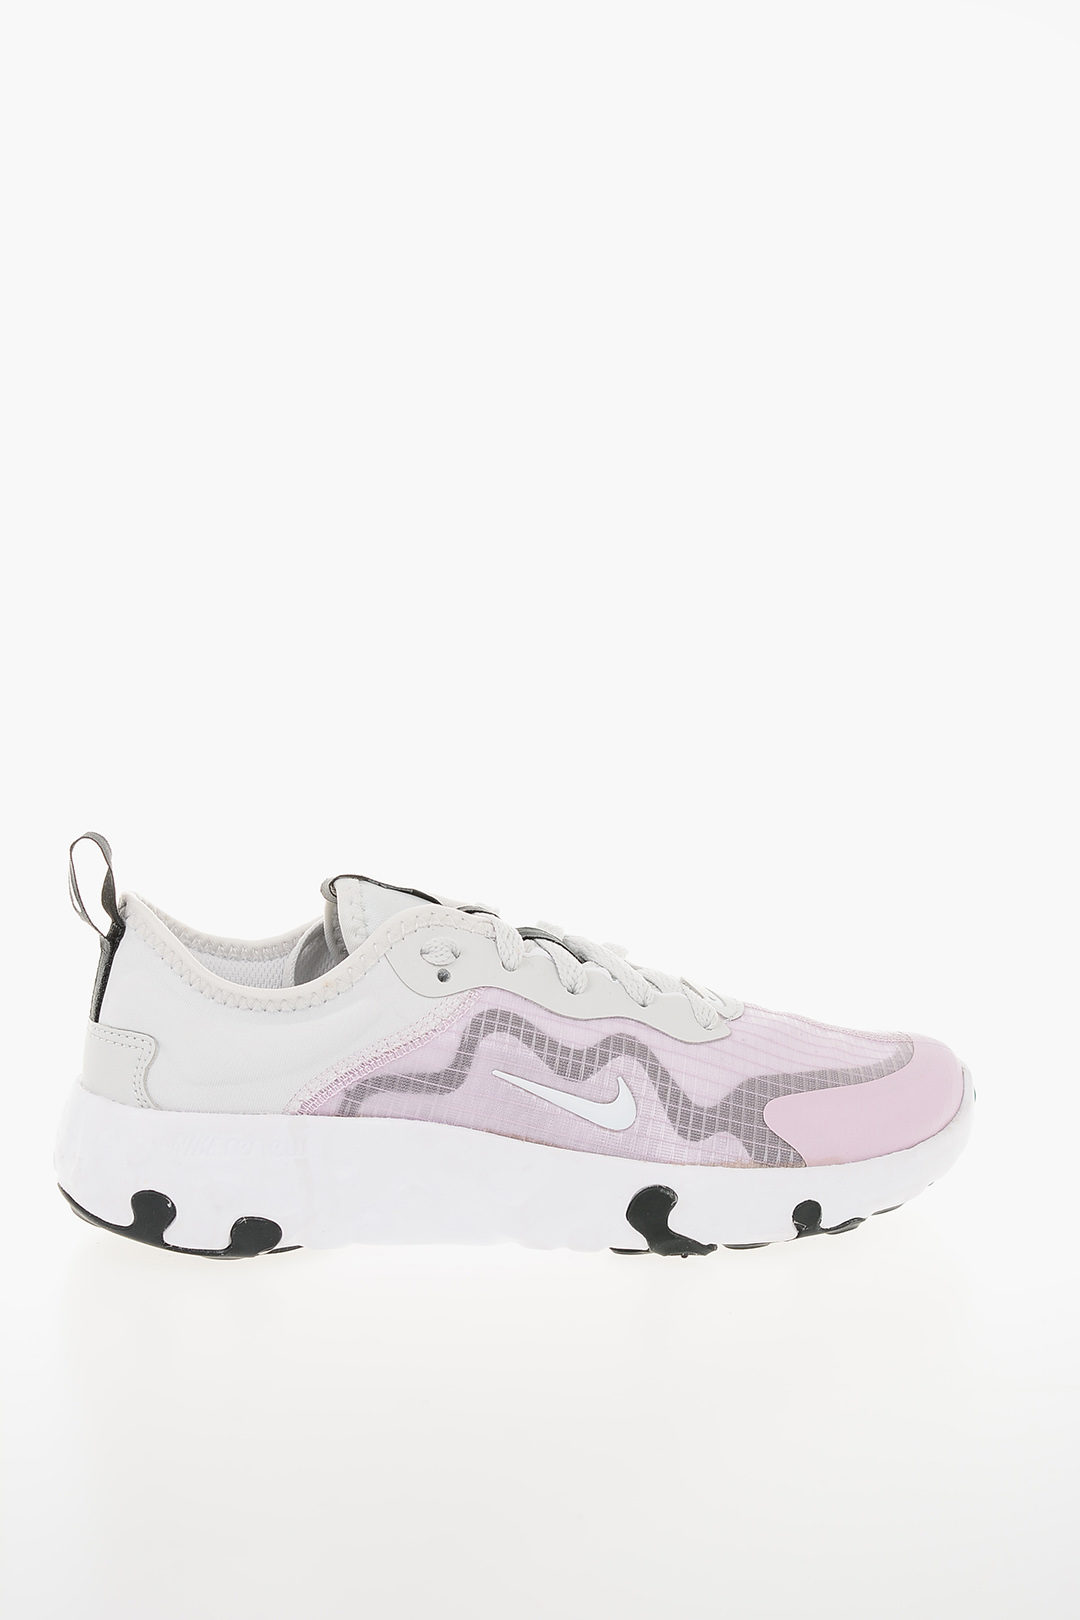 NIKE RENEW LUCENT(GS) Sneakers women - Glamood Outlet